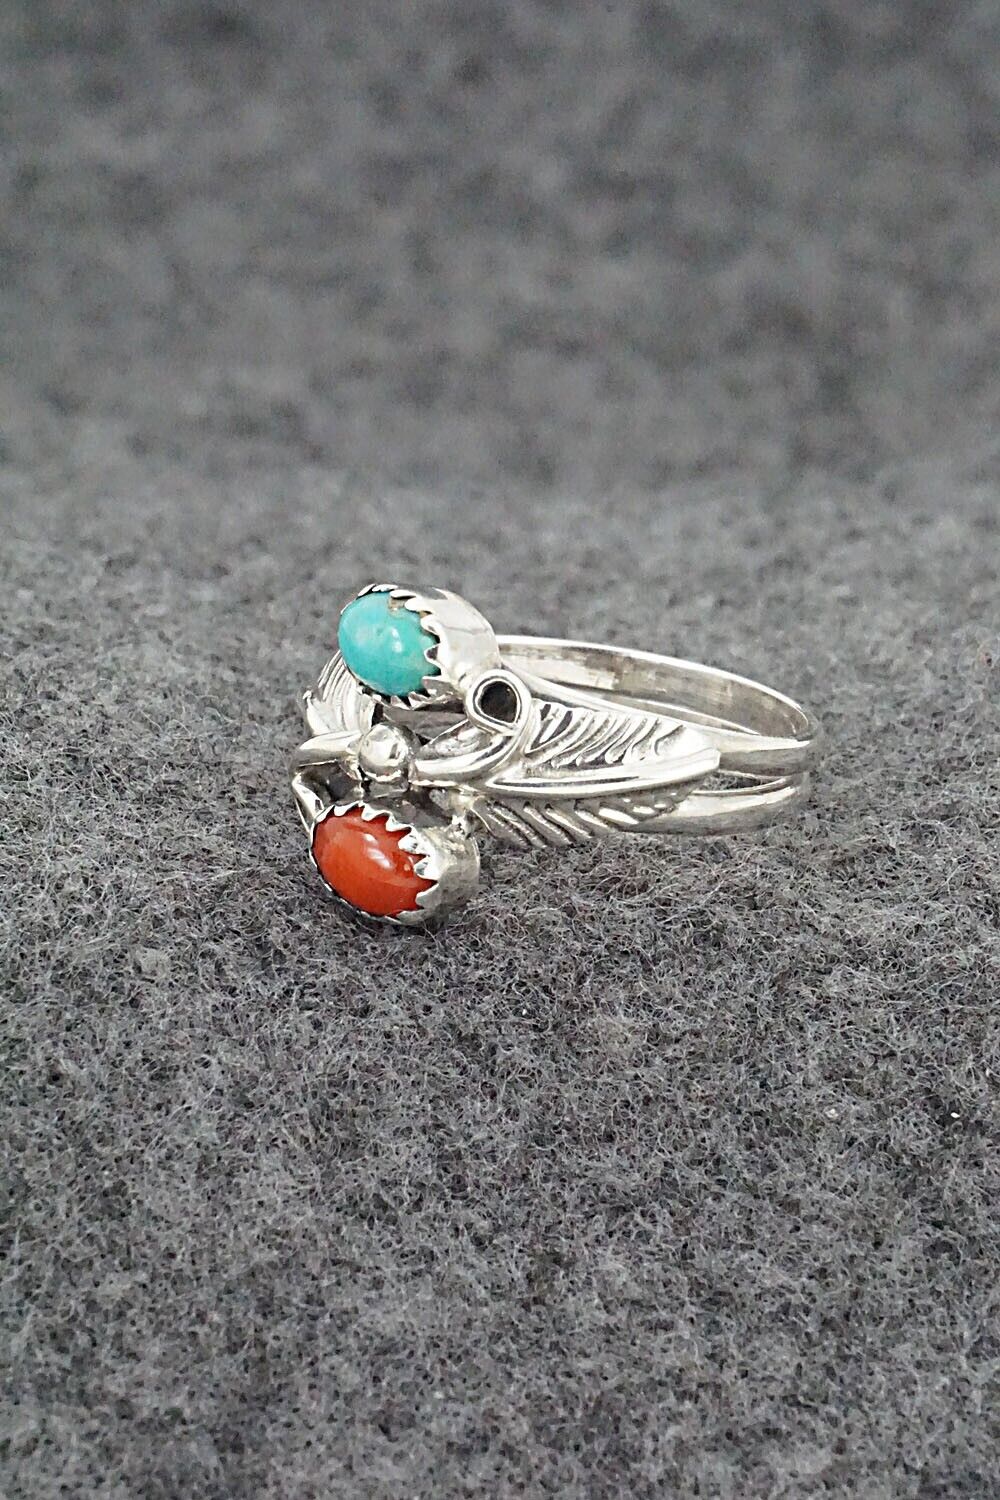 Turquoise, Coral & Sterling Silver Ring - Harry B. Yazzie - Size 7.75